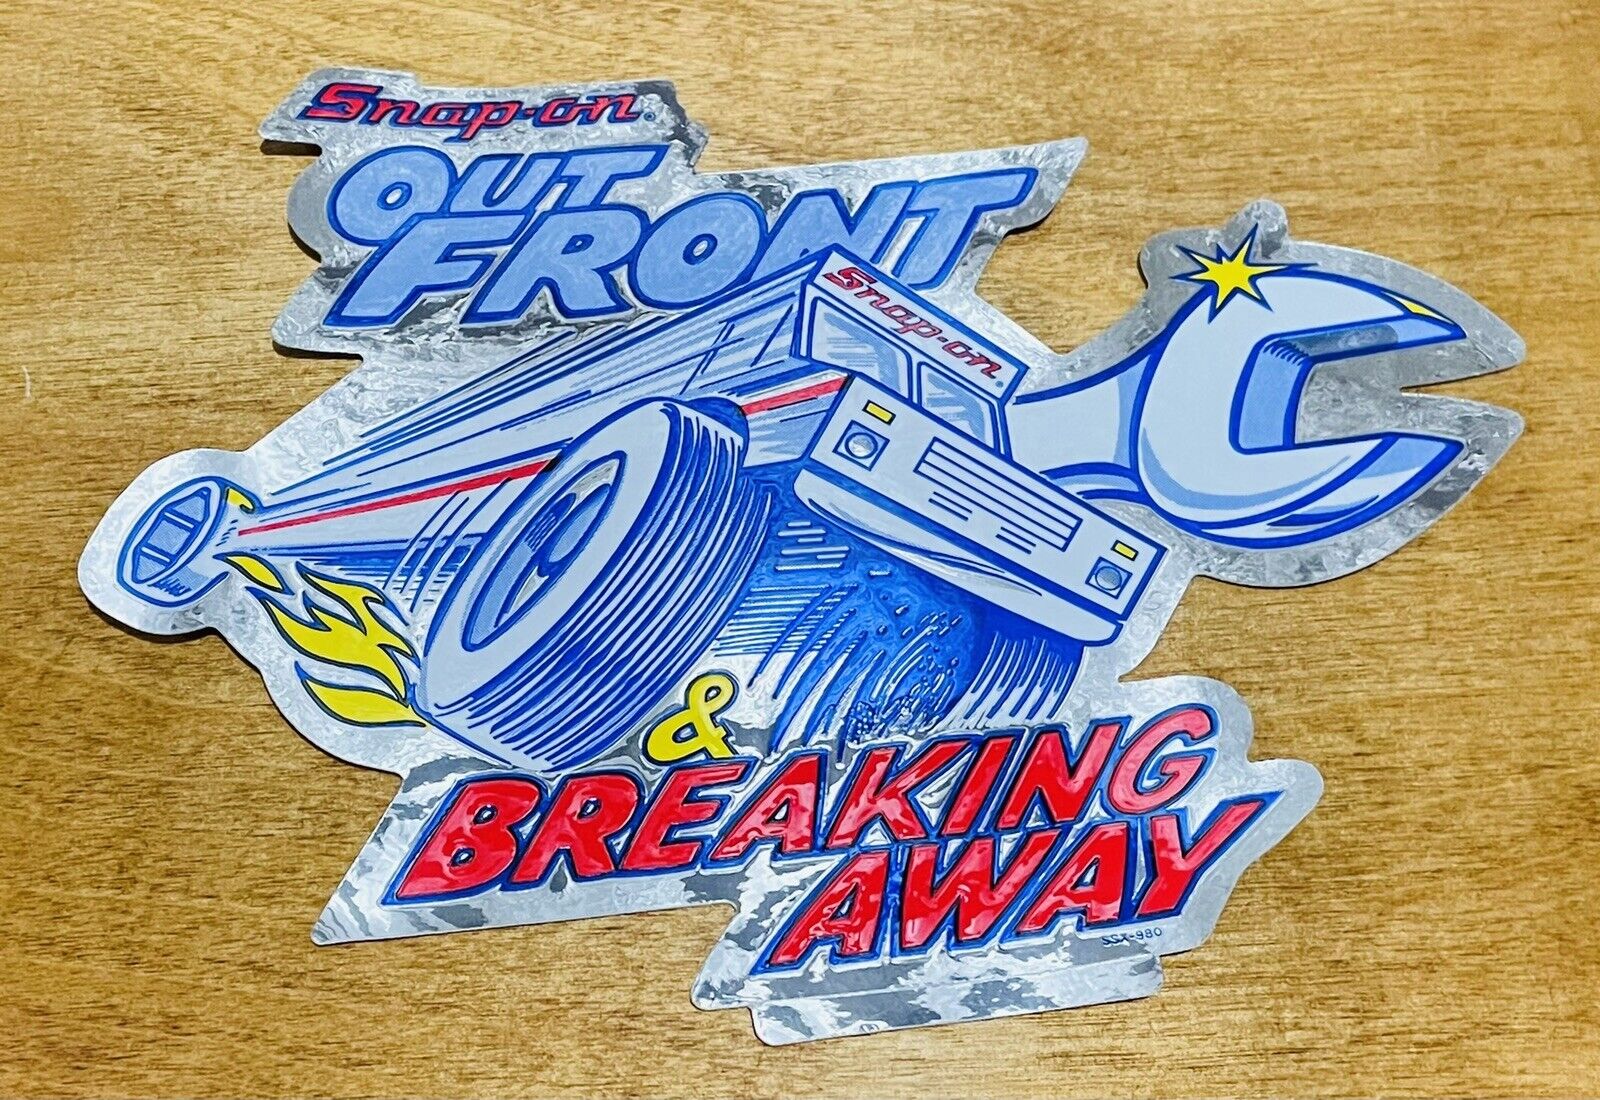 Vintage 1985 Snap On Tools Foil Decal sticker “Out Front Breaking Away”Old Stock